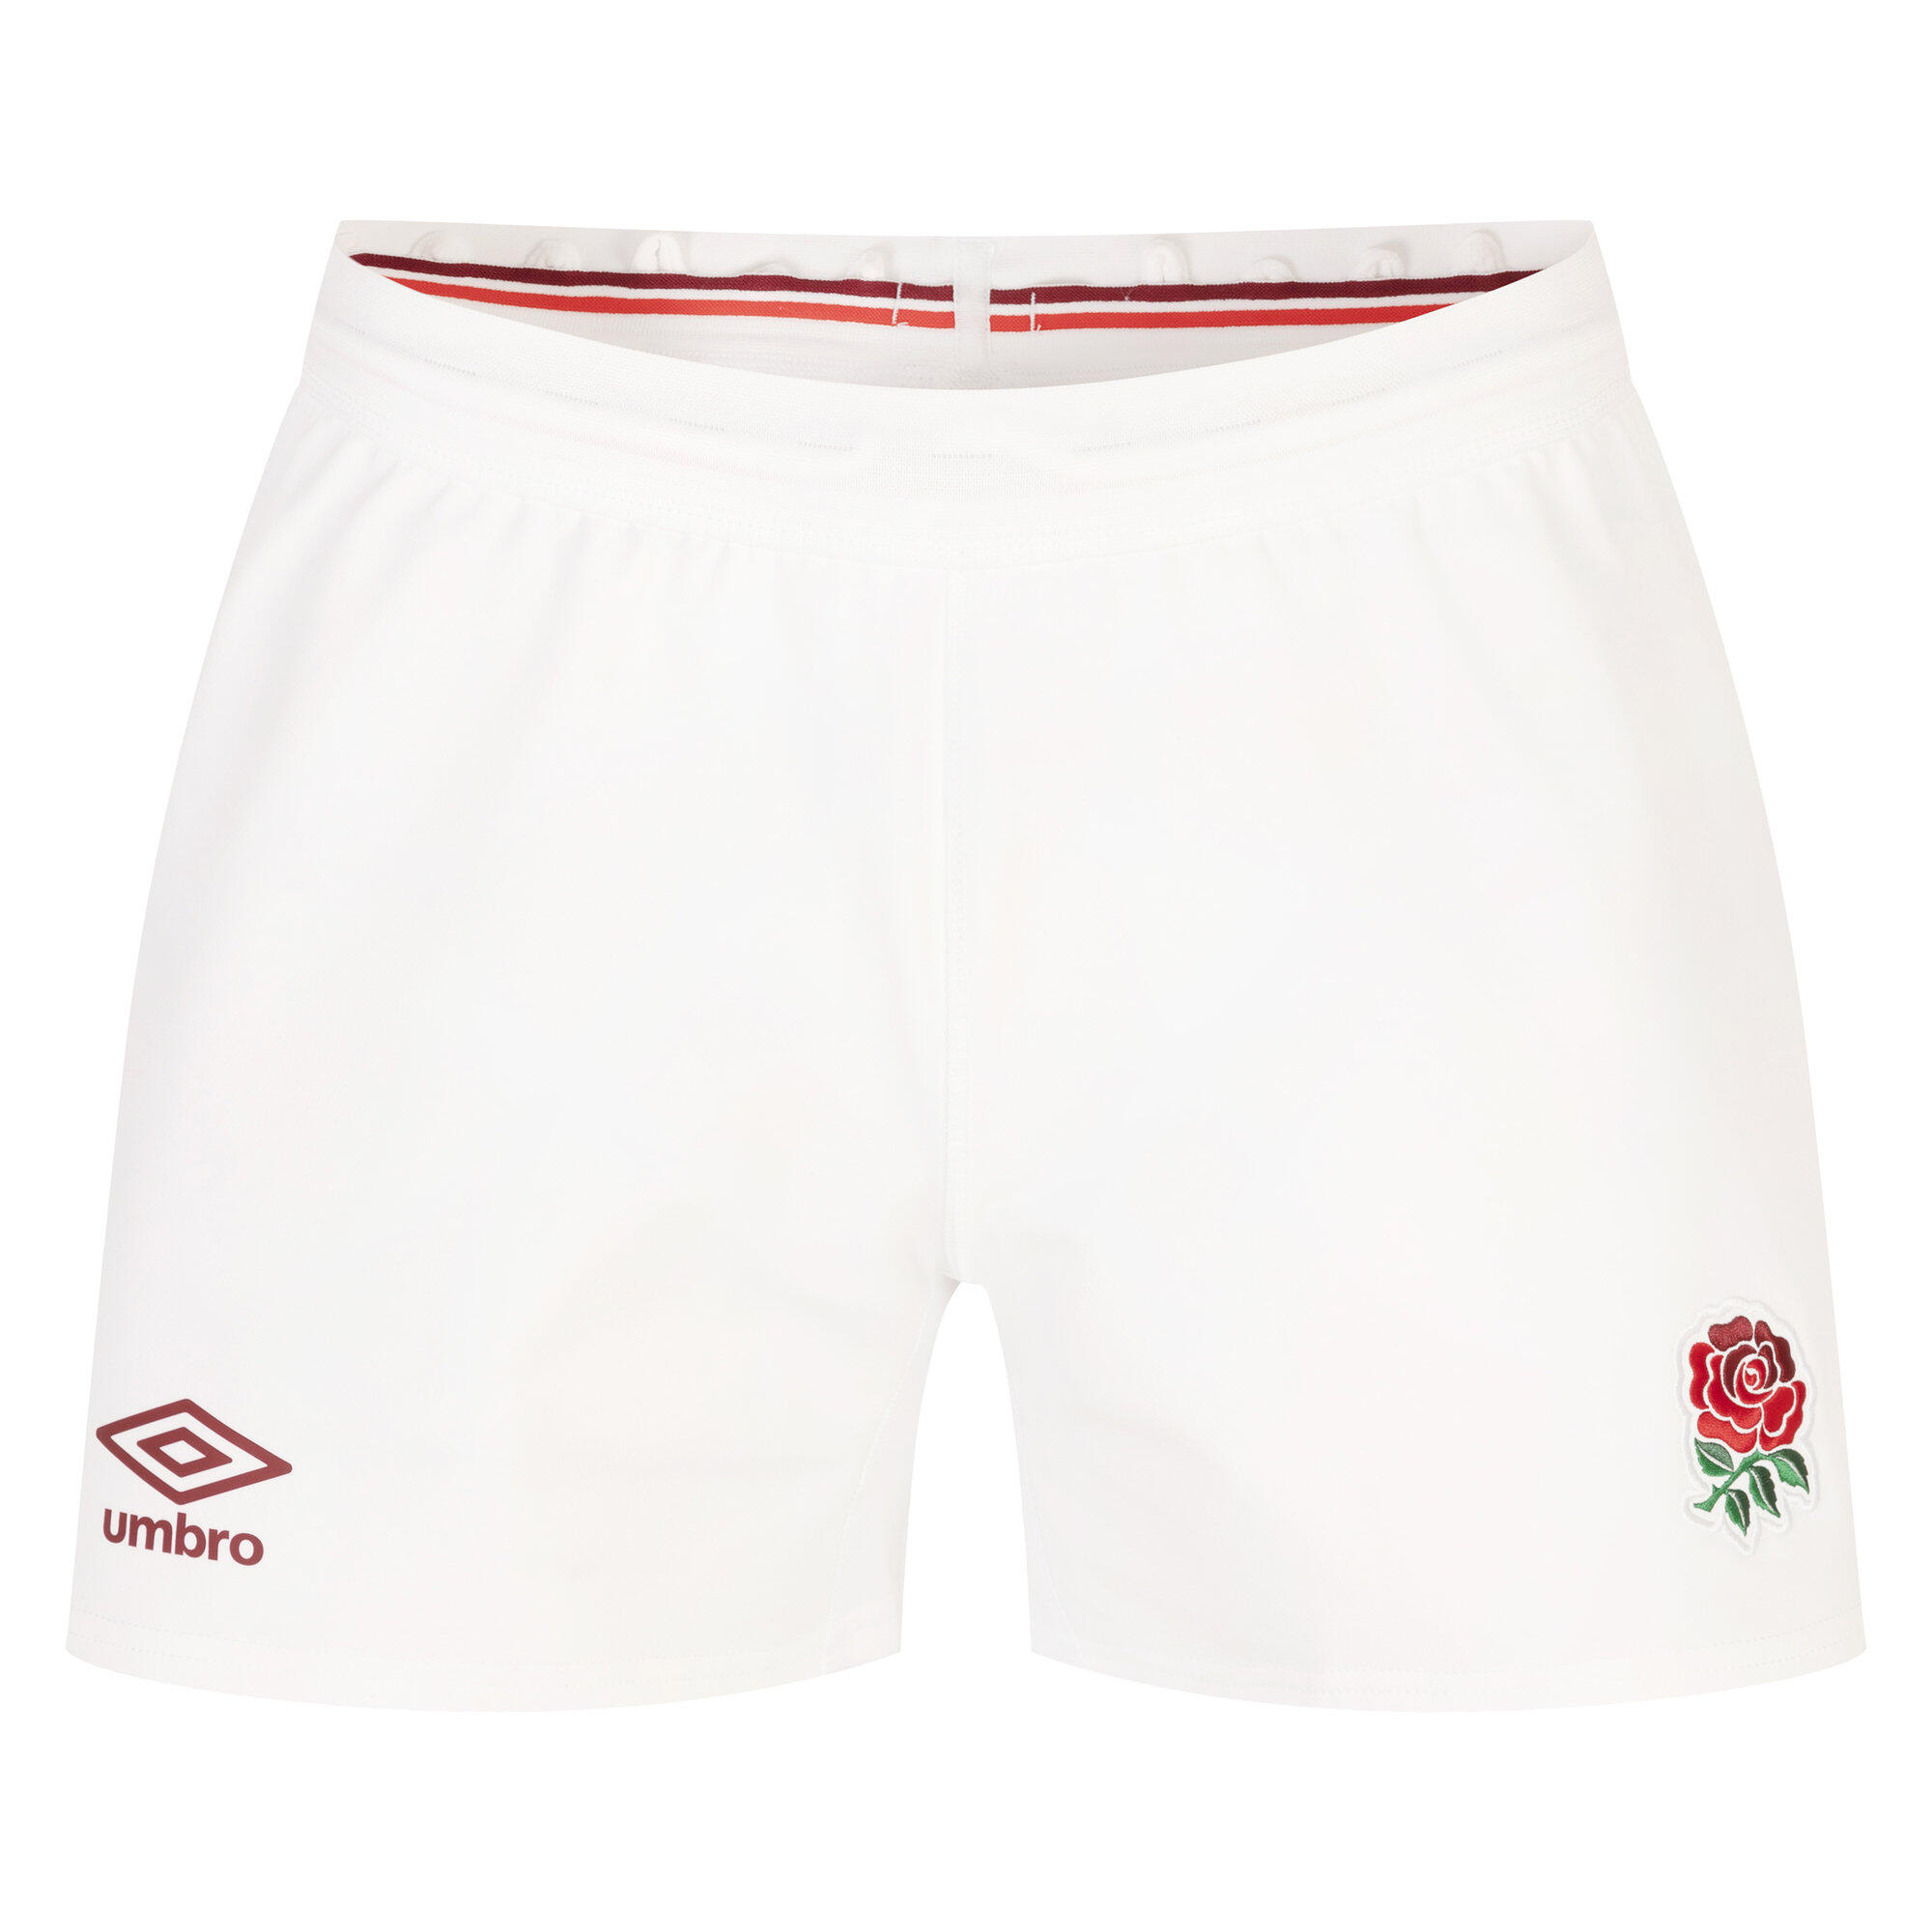 Mens 23/24 Pro England Rugby Home Shorts (White) 1/4